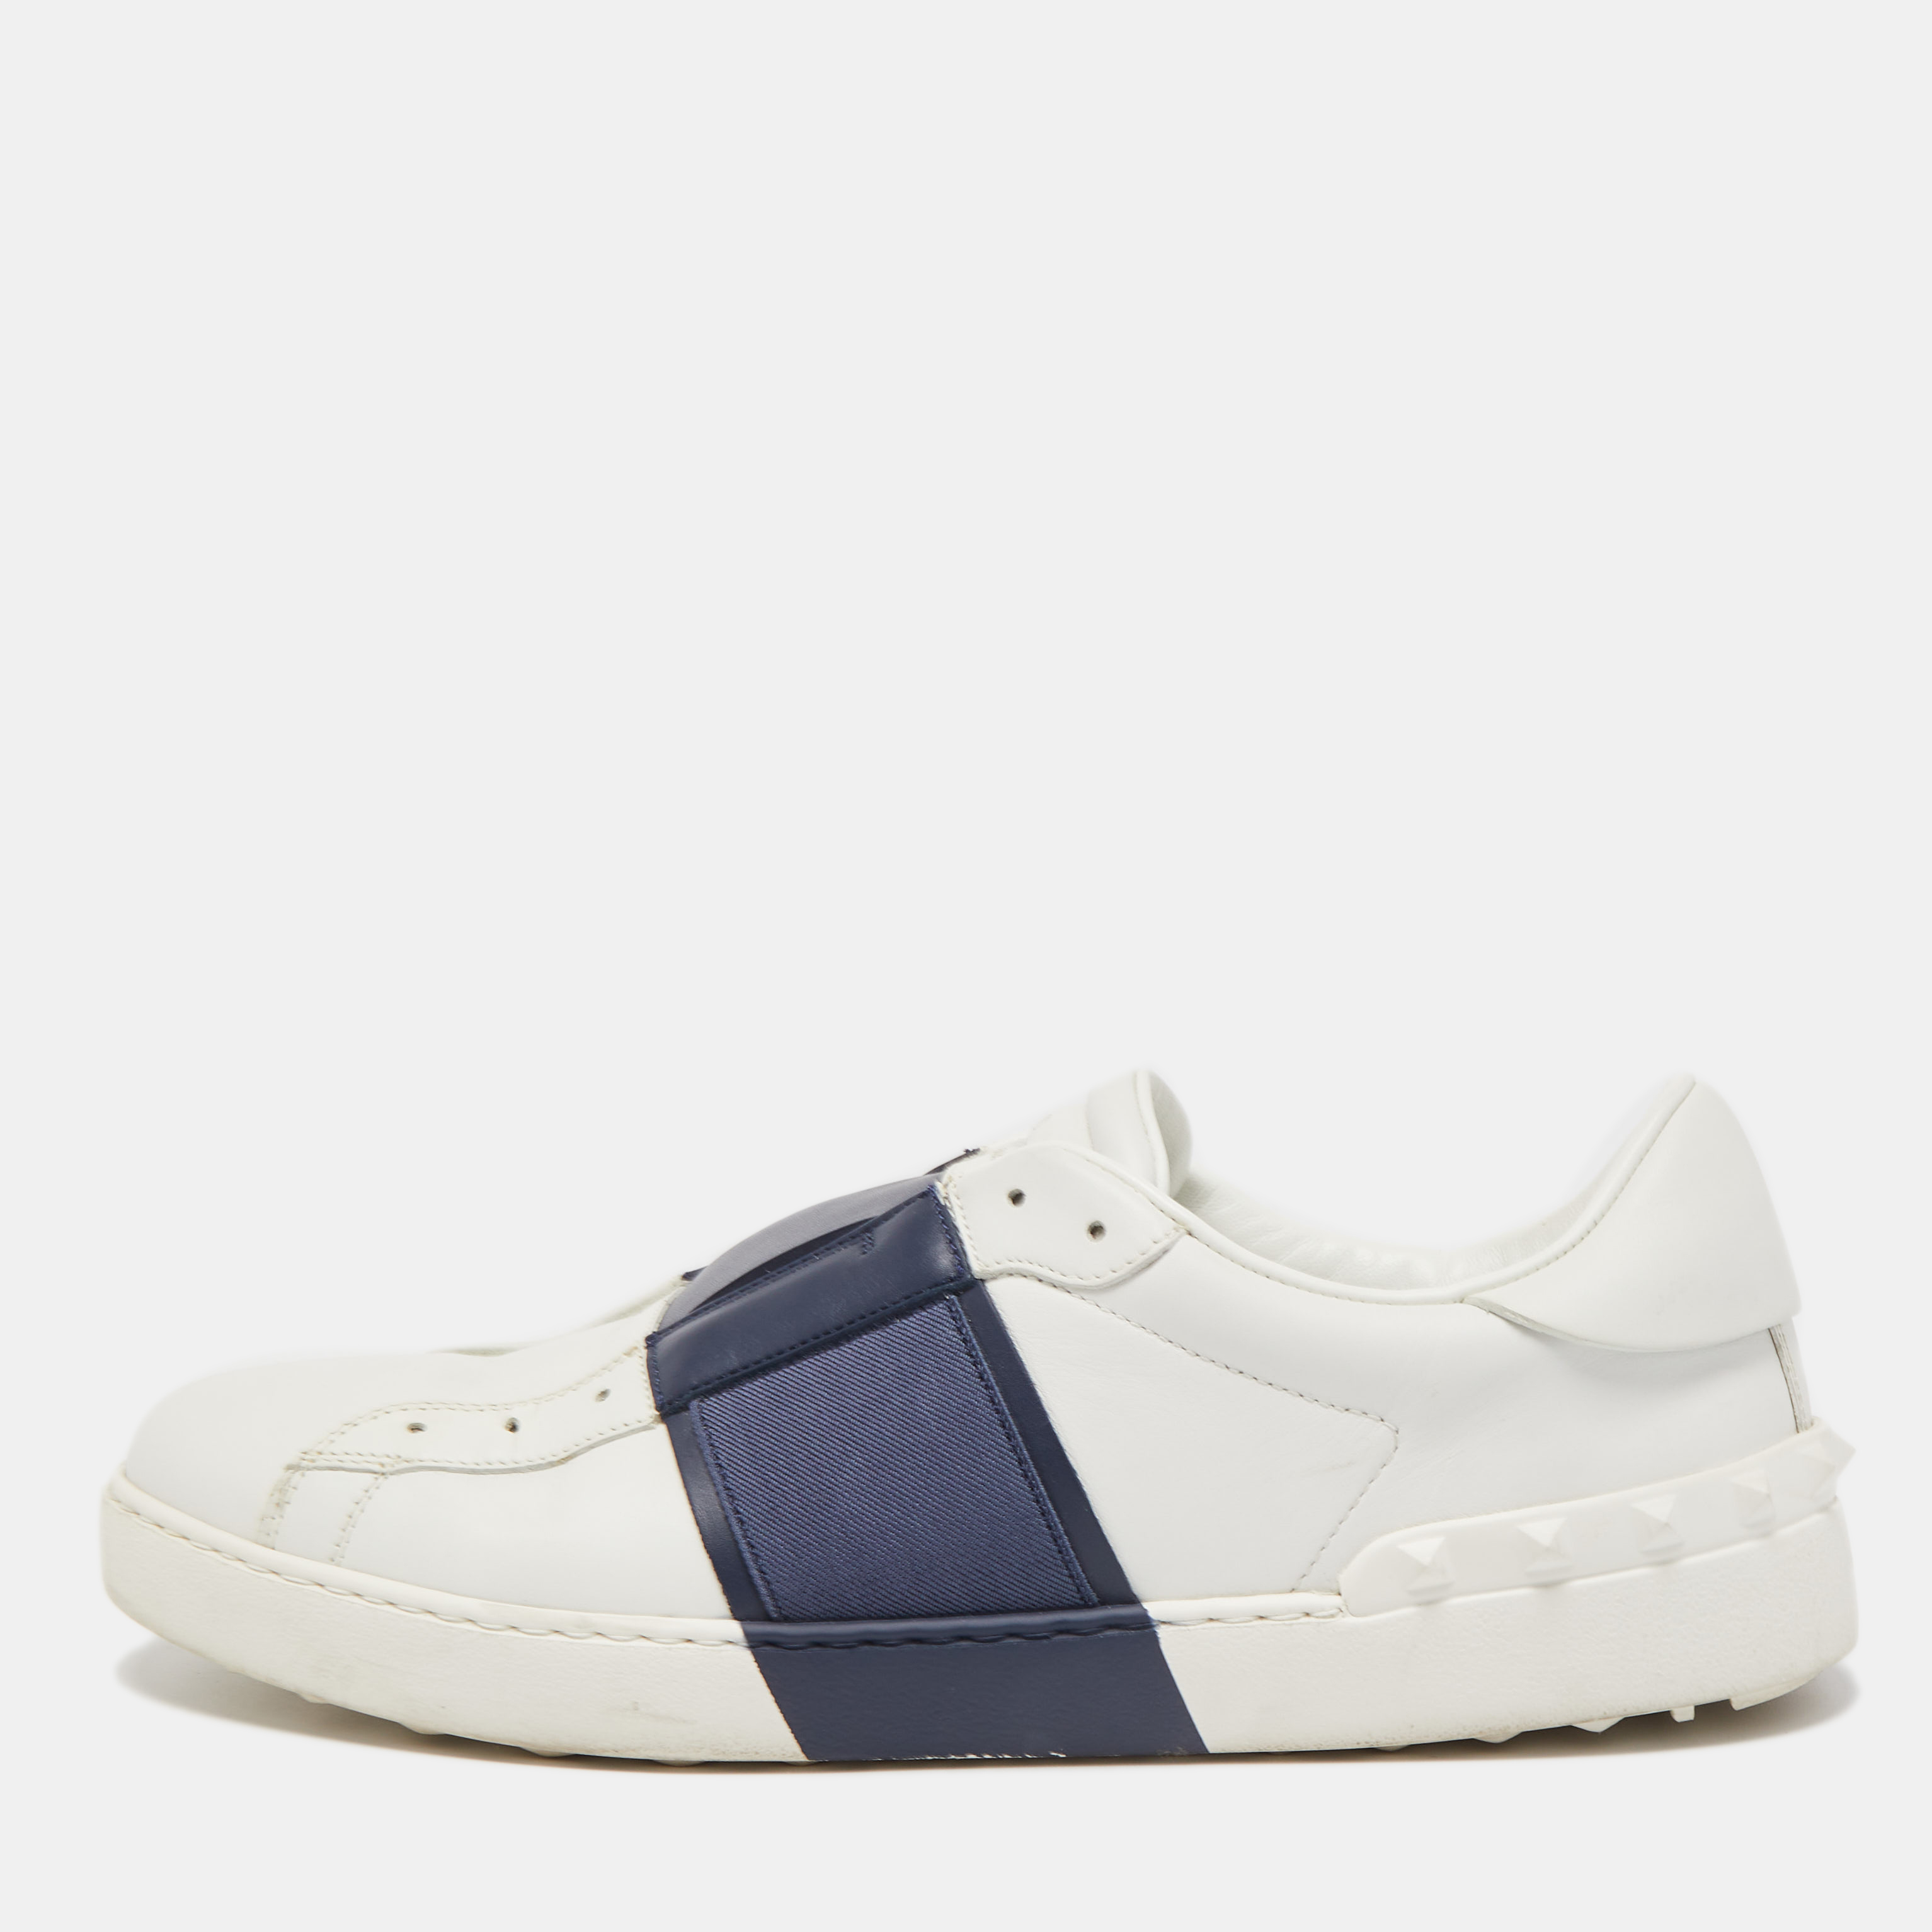 Sneakers from Valentino will fetch nothing but style comfort and relaxation to any look. Crafted from high quality materials into a sturdy profile these sneakers are the best pick to amp up any casual or leisure looks. Add them to your collection today